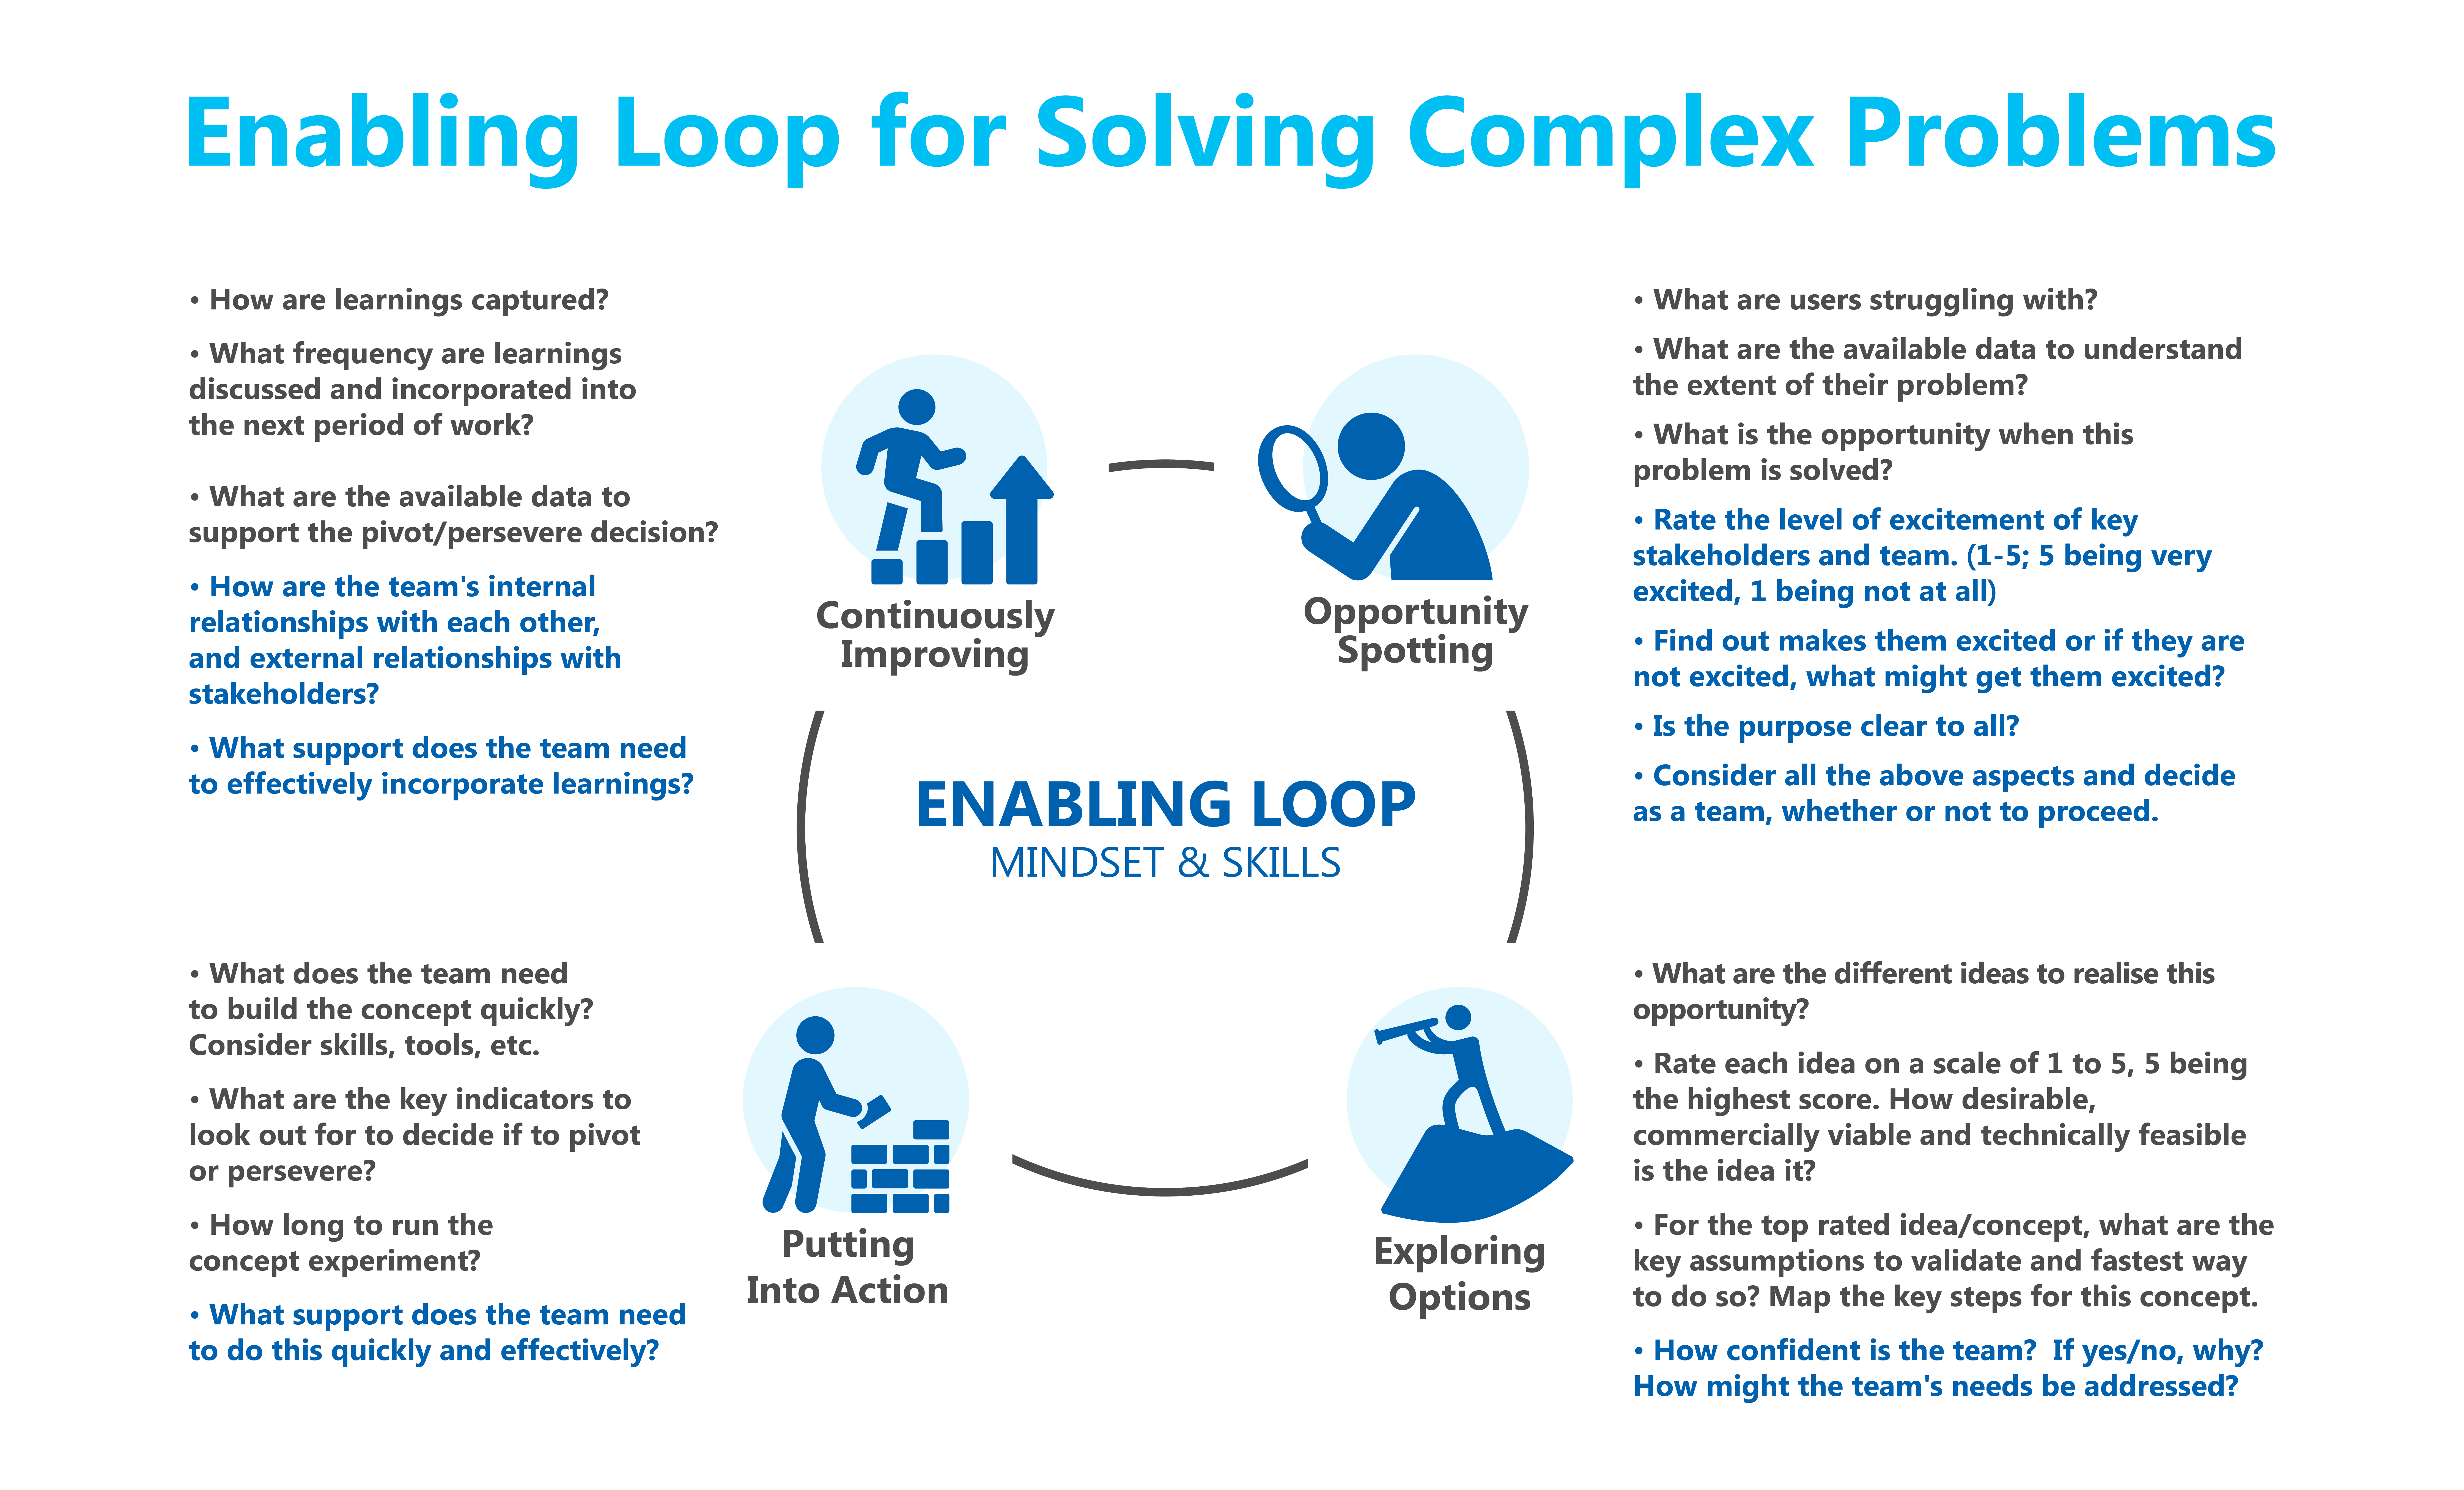 Fig 1: Enabling Loop for Solving Complex Problems